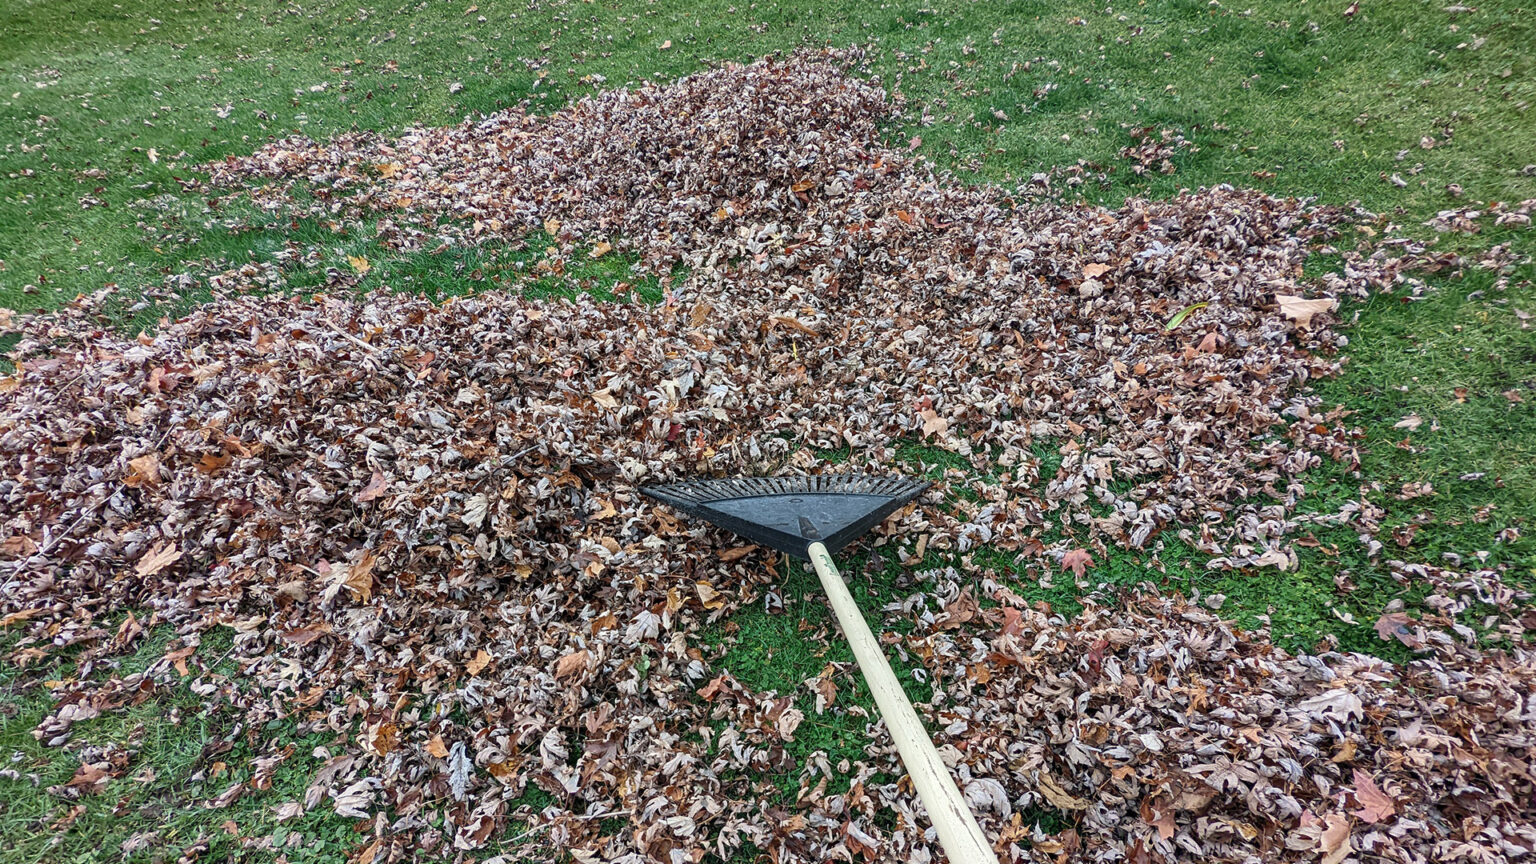 A wooden-handled rake sits on a lawn atop several small piles of dead leaves.